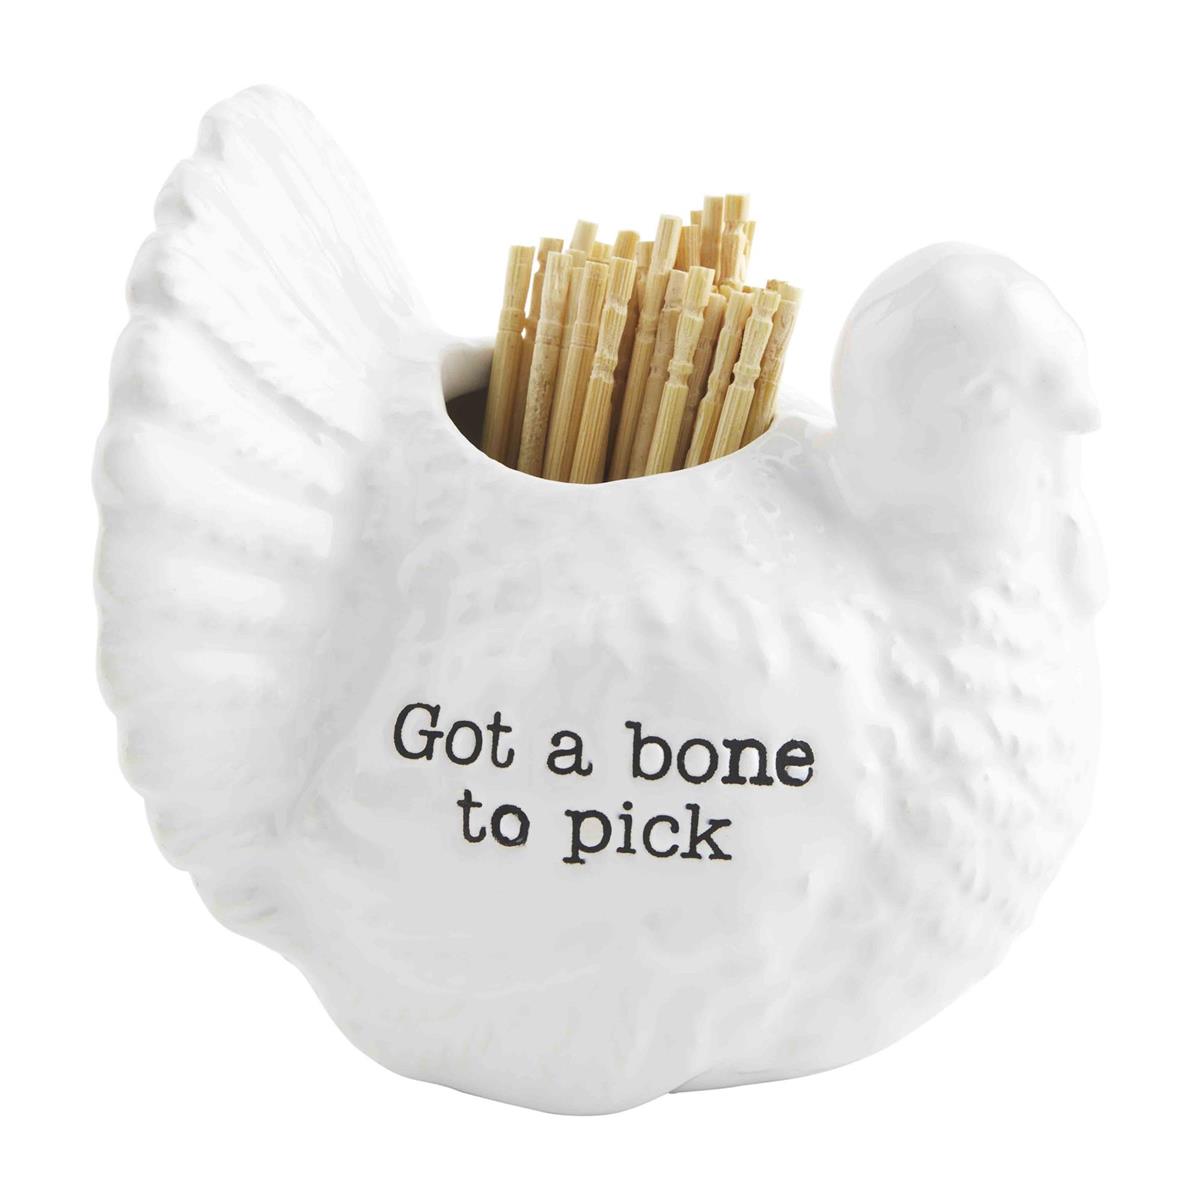 Fall Toothpick Holder Sets by Mud Pie